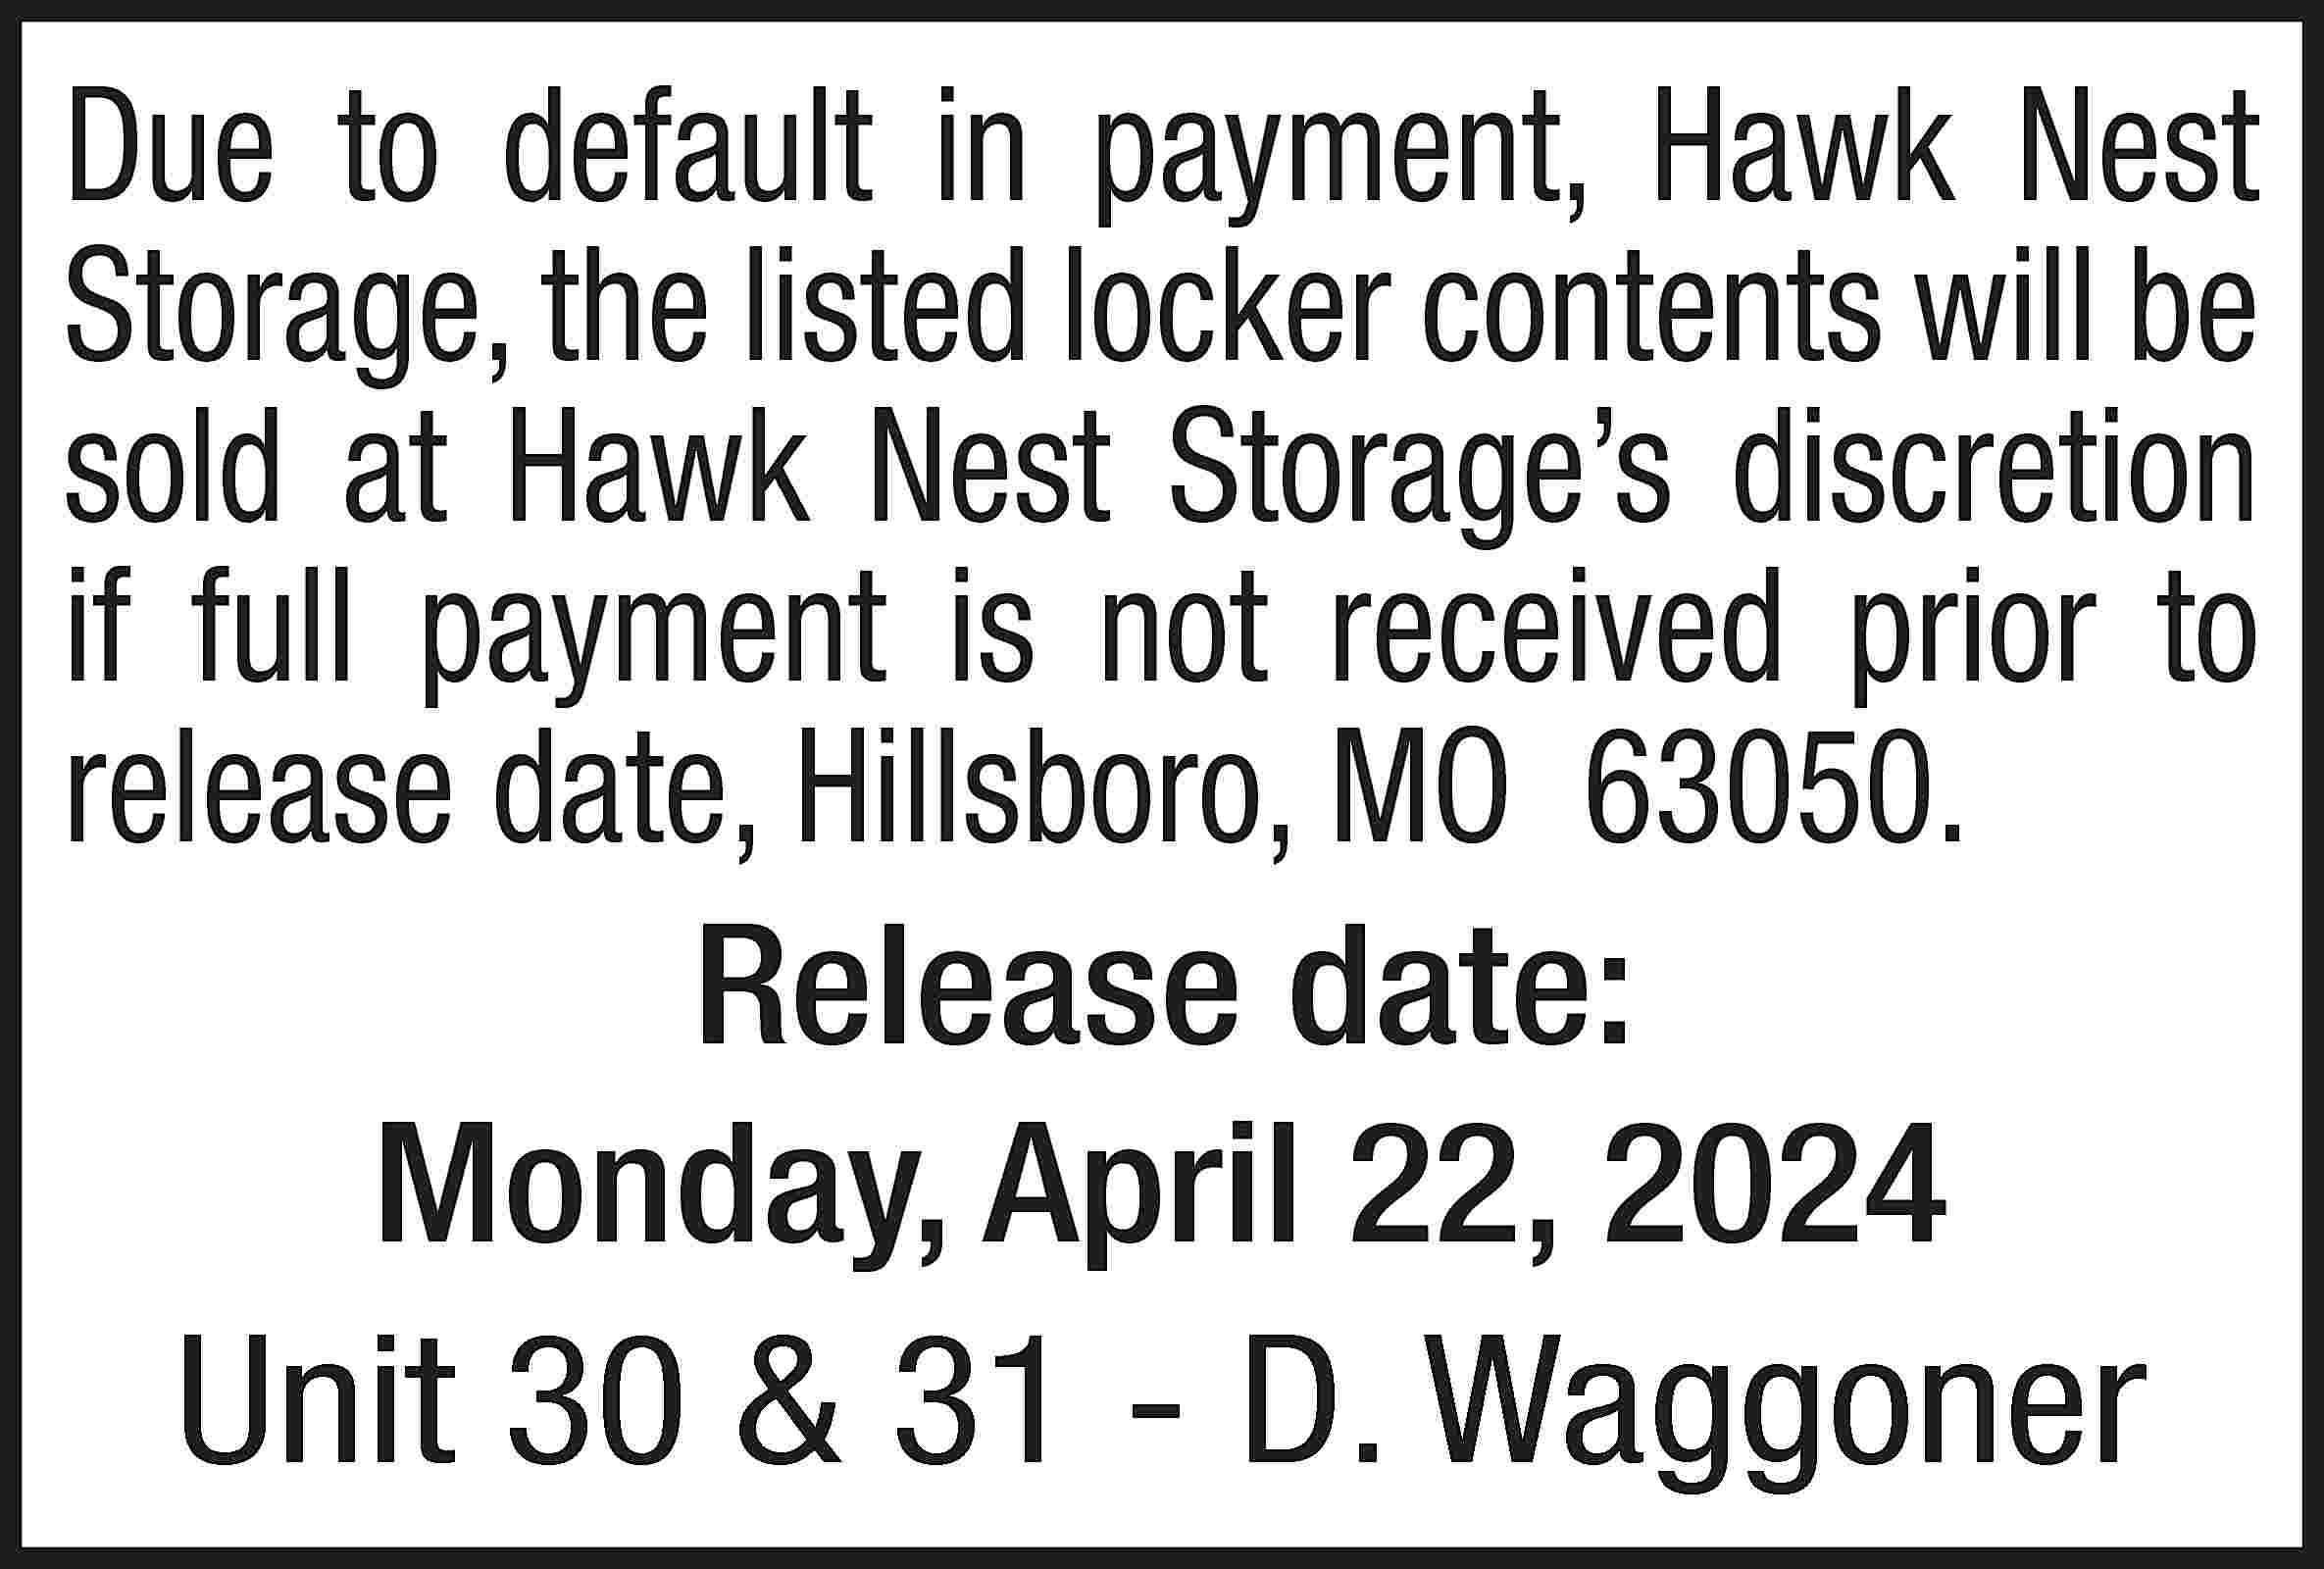 Due to default in payment,  Due to default in payment, Hawk Nest Storage, the listed locker contents will be sold at Hawk Nest Storage’s discretion if full payment is not received prior to release date, Hillsboro, MO 63050. Release date: Monday, April 22, 2024 Unit 30 & 31 - D. Waggoner